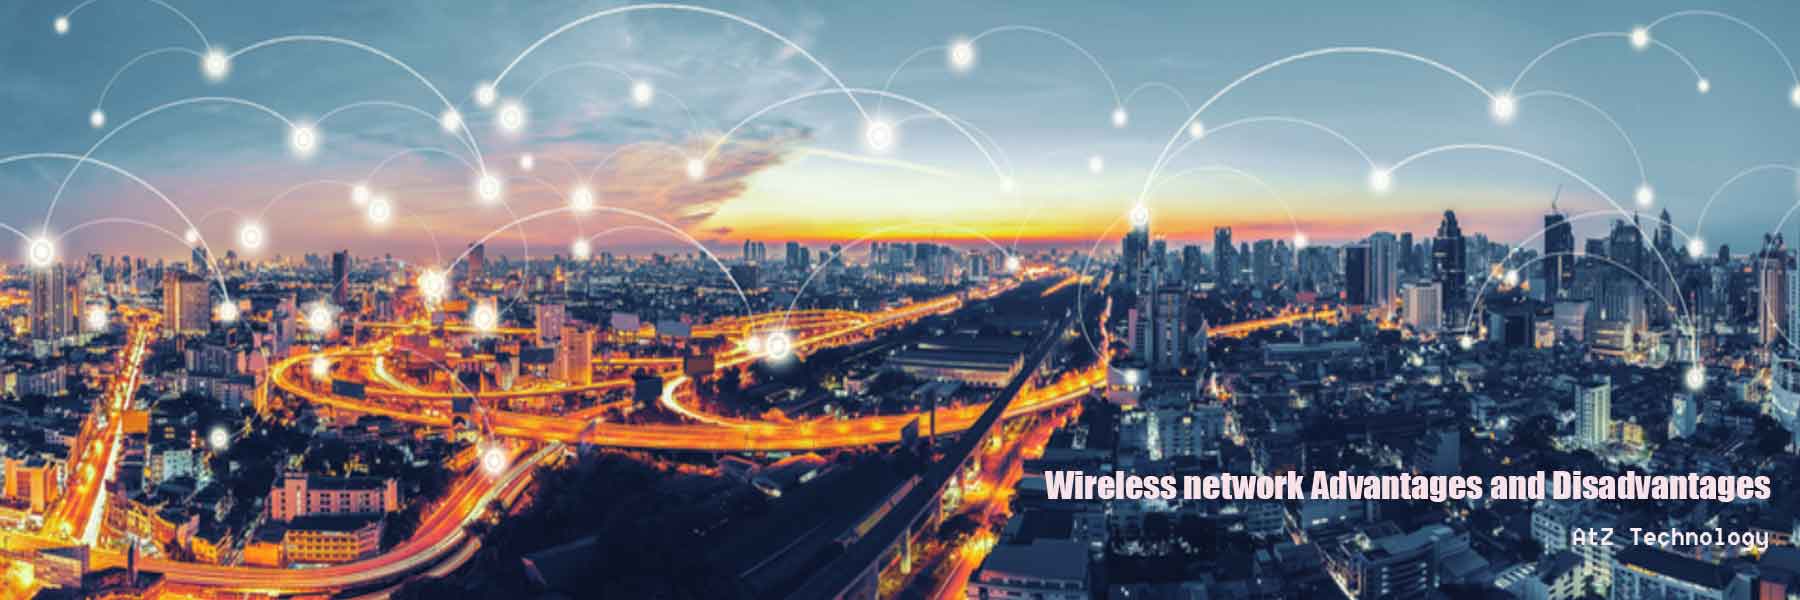 wireless network advantages and disadvantages